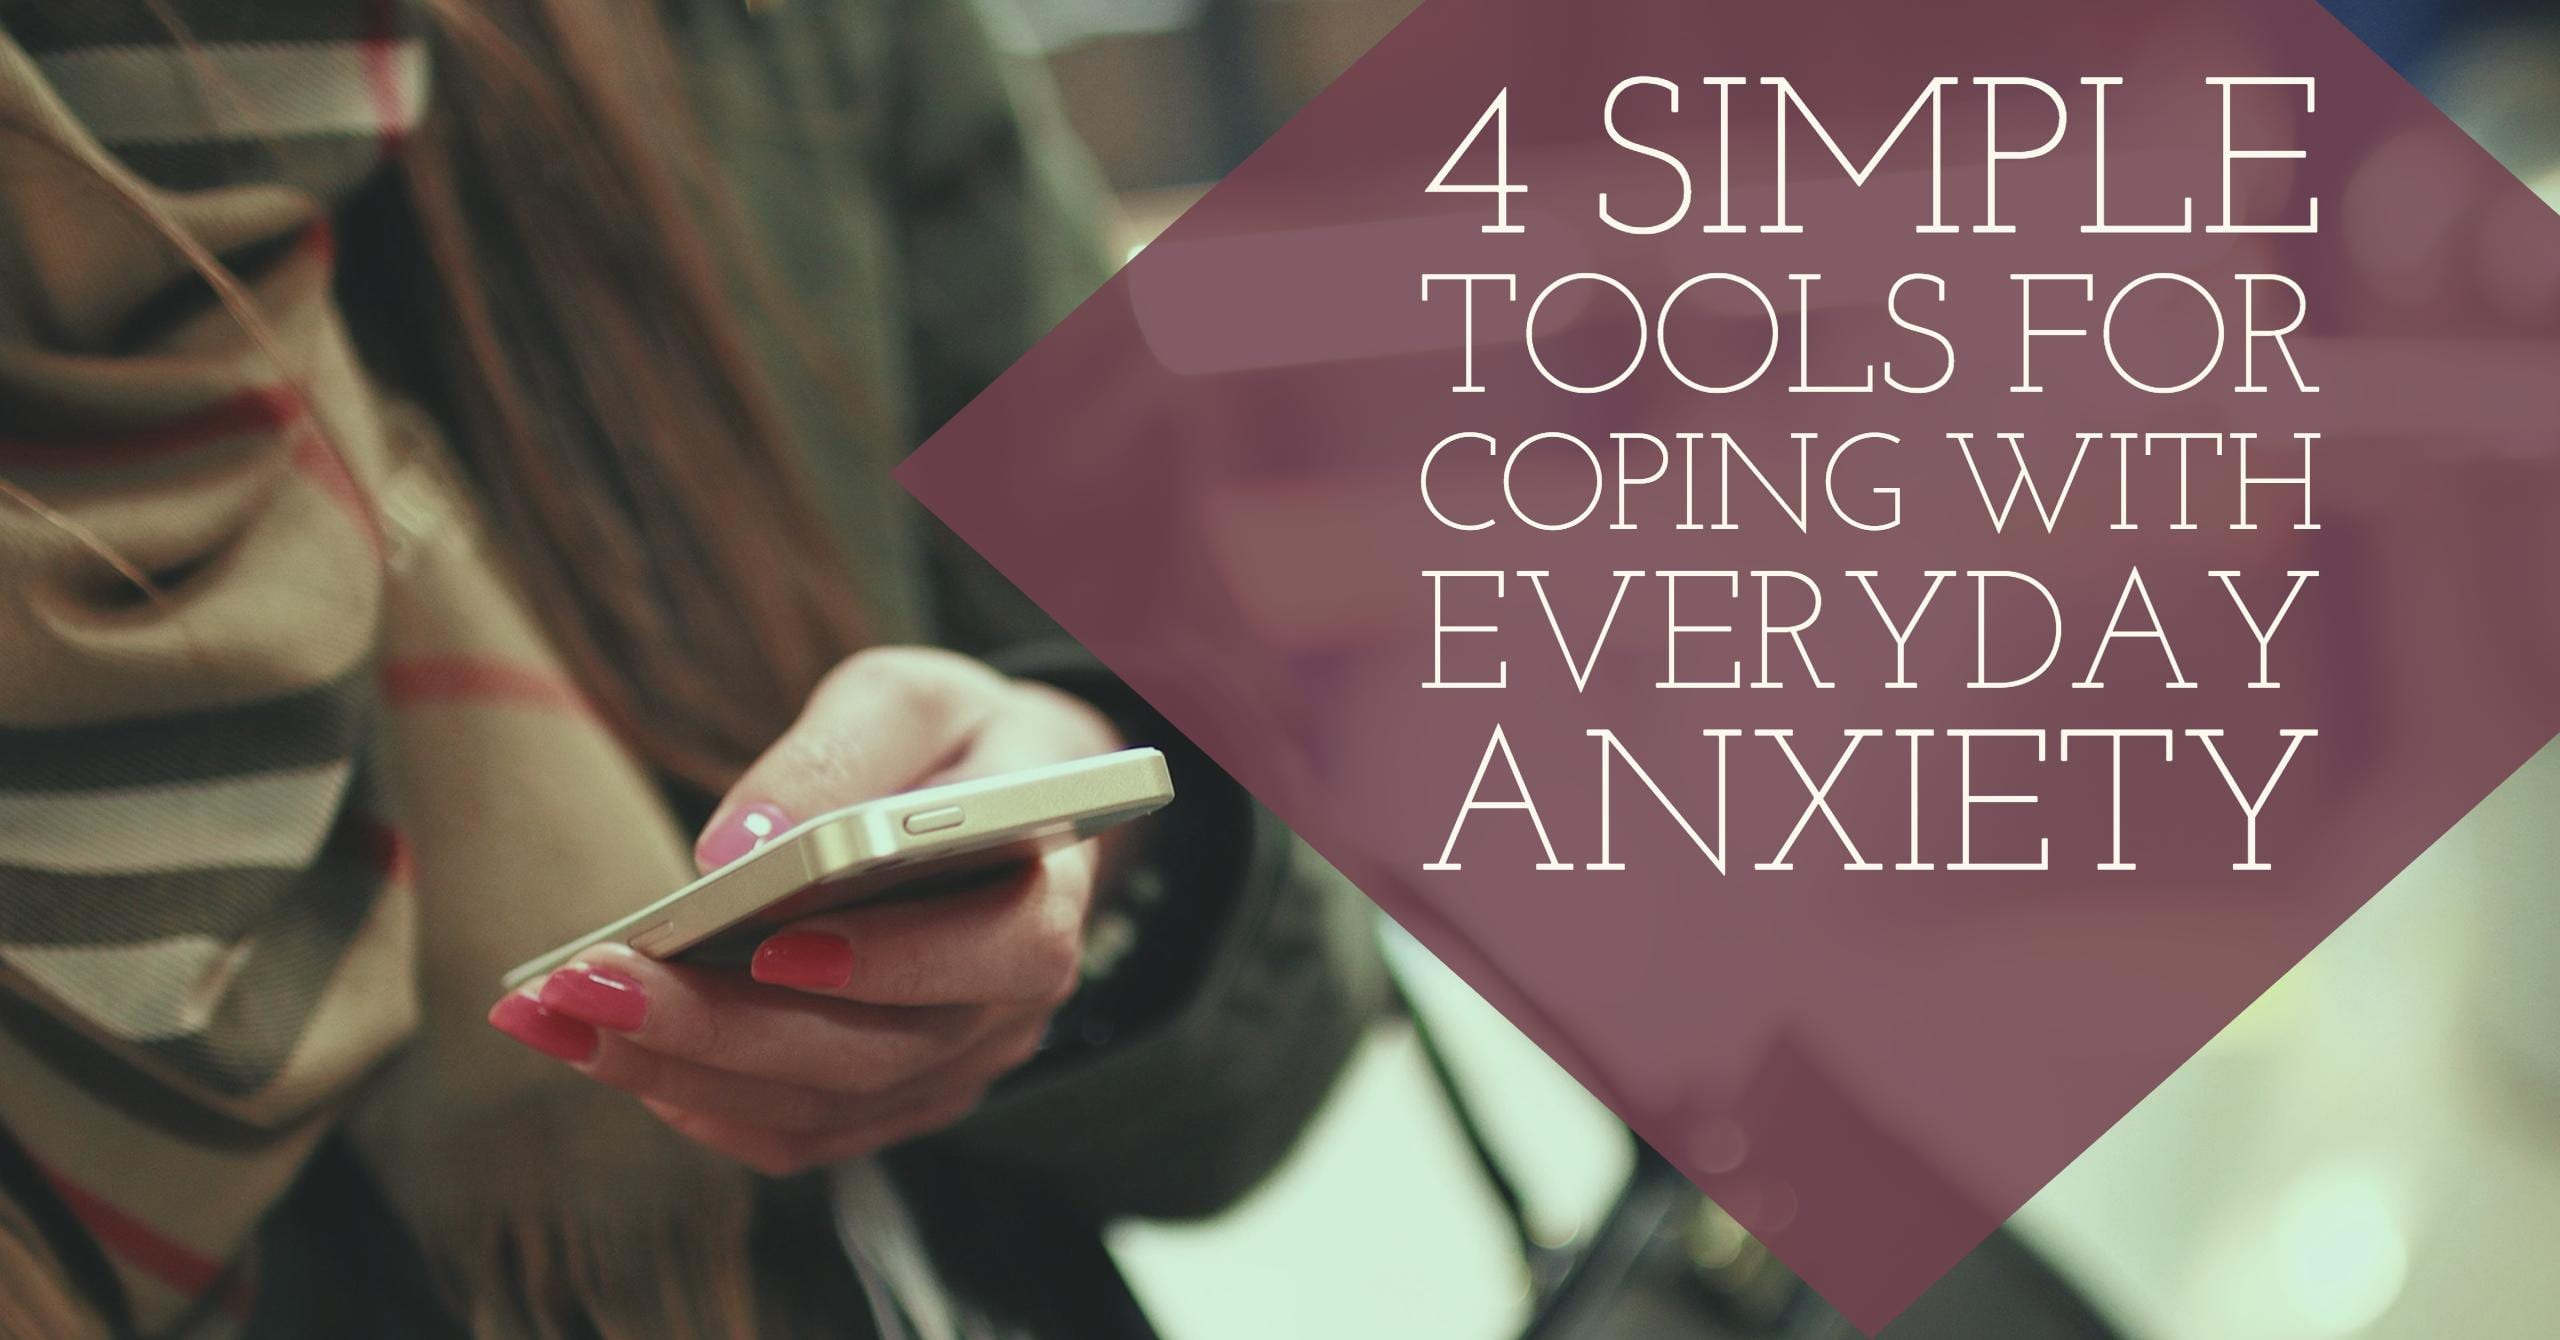 4 Simple Tools For Coping With Everyday Anxiety